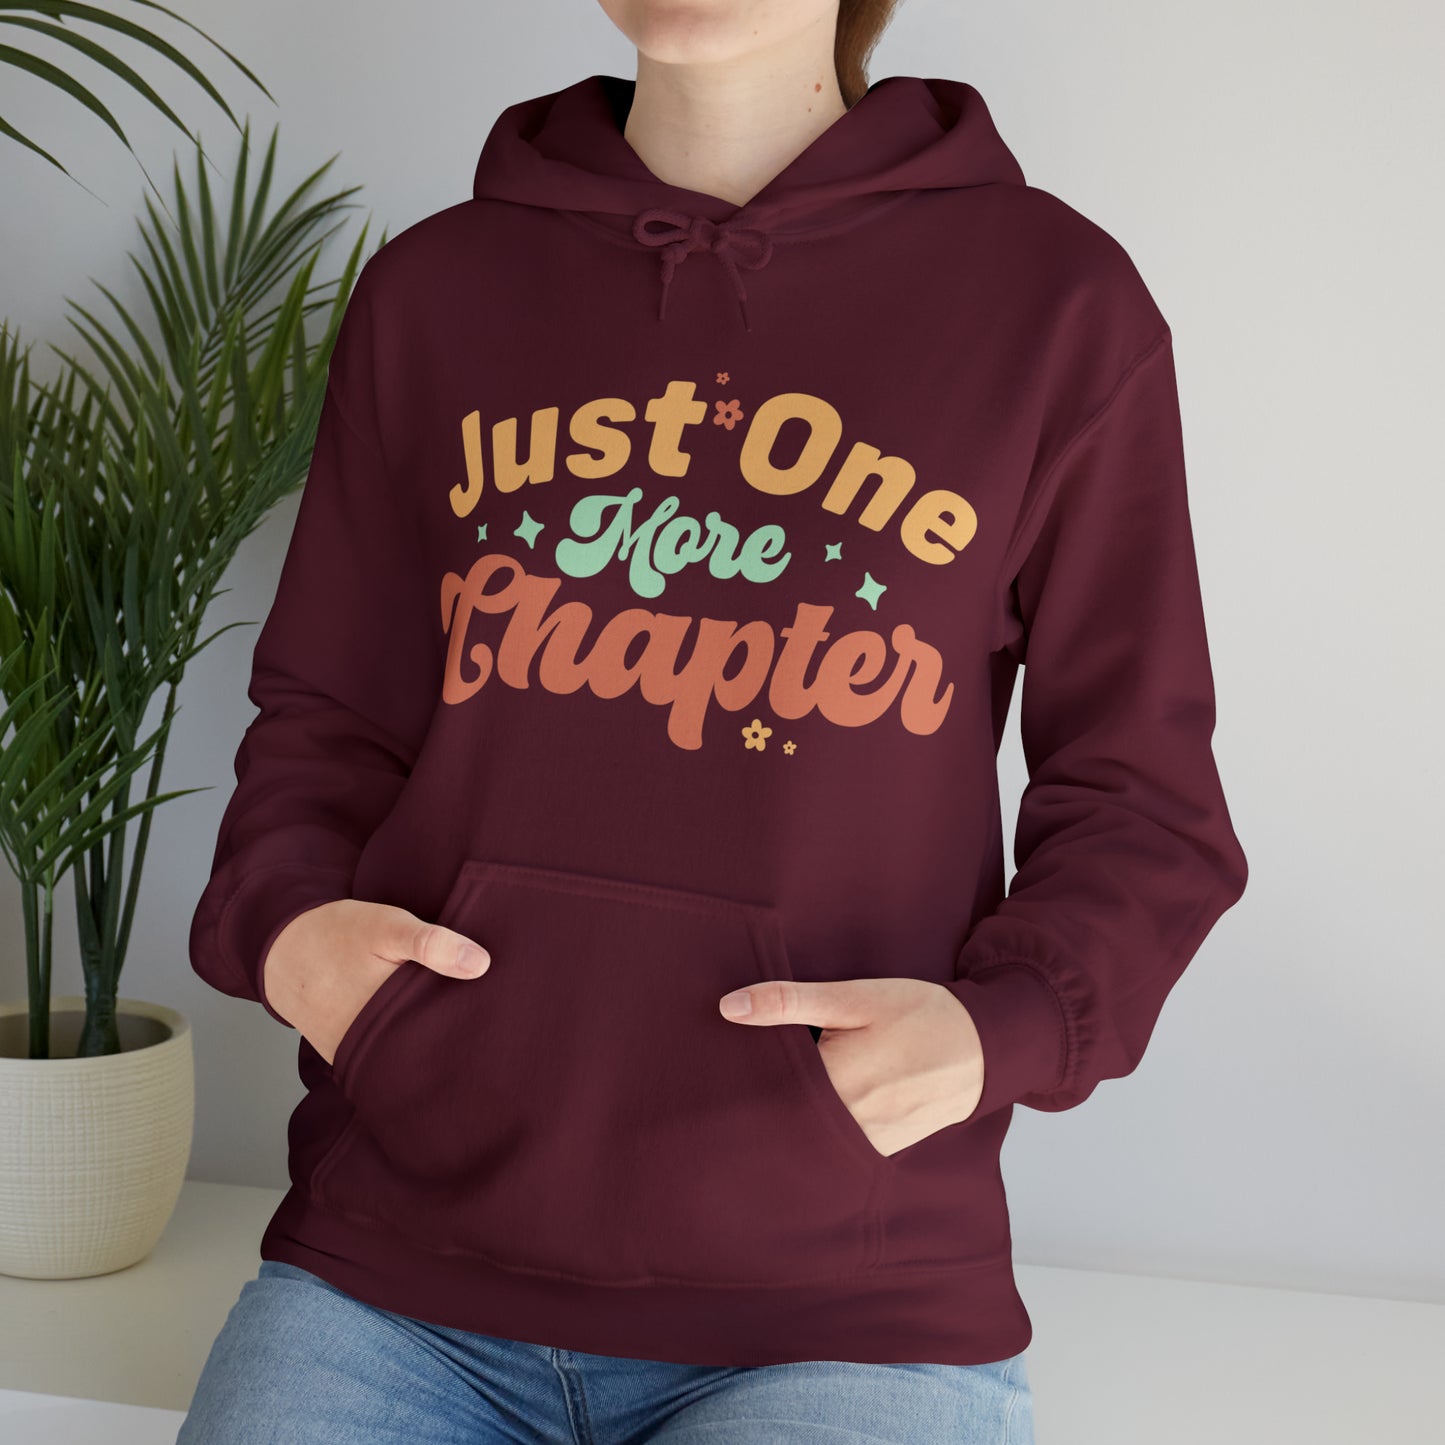 "Just One More Chapter" Heavy Blend™ Hooded Sweatshirt